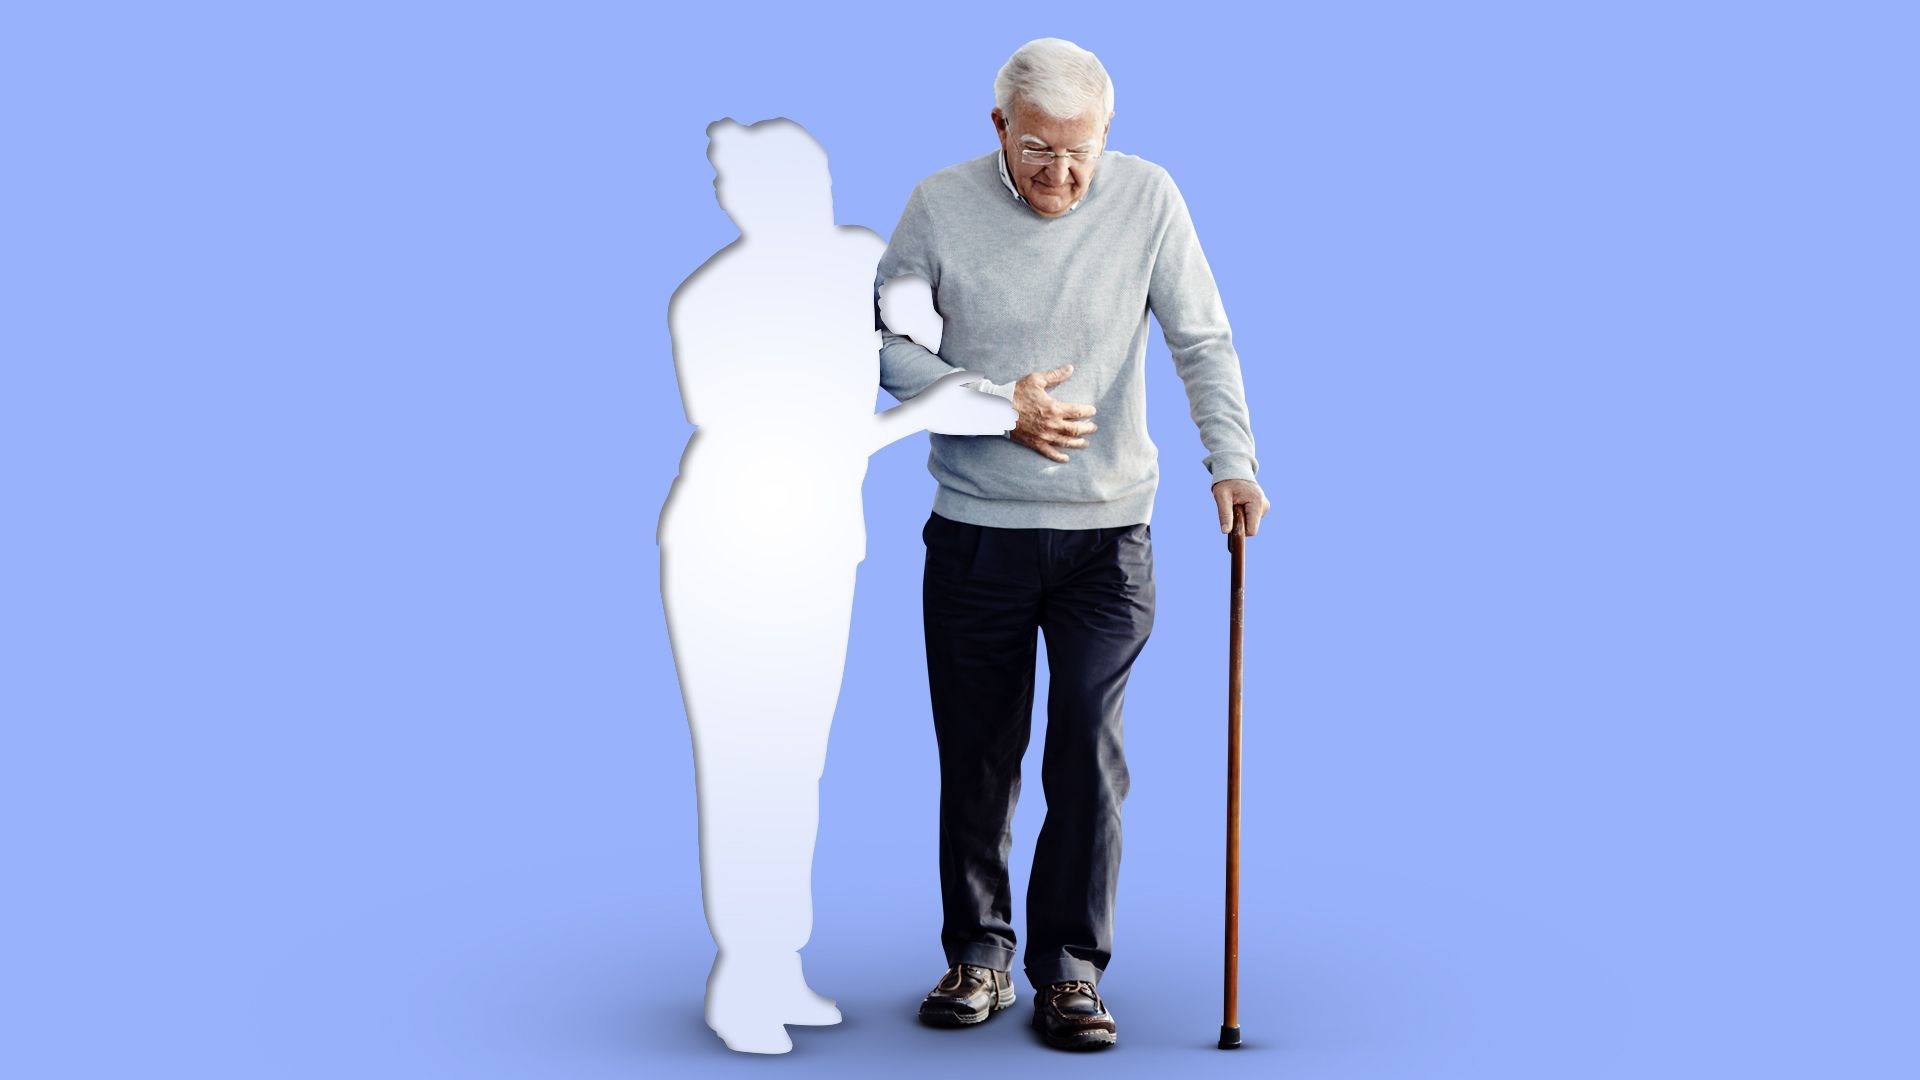 Illustration of an older man walking with a cain assisted by a cutout, empty space for a nurse